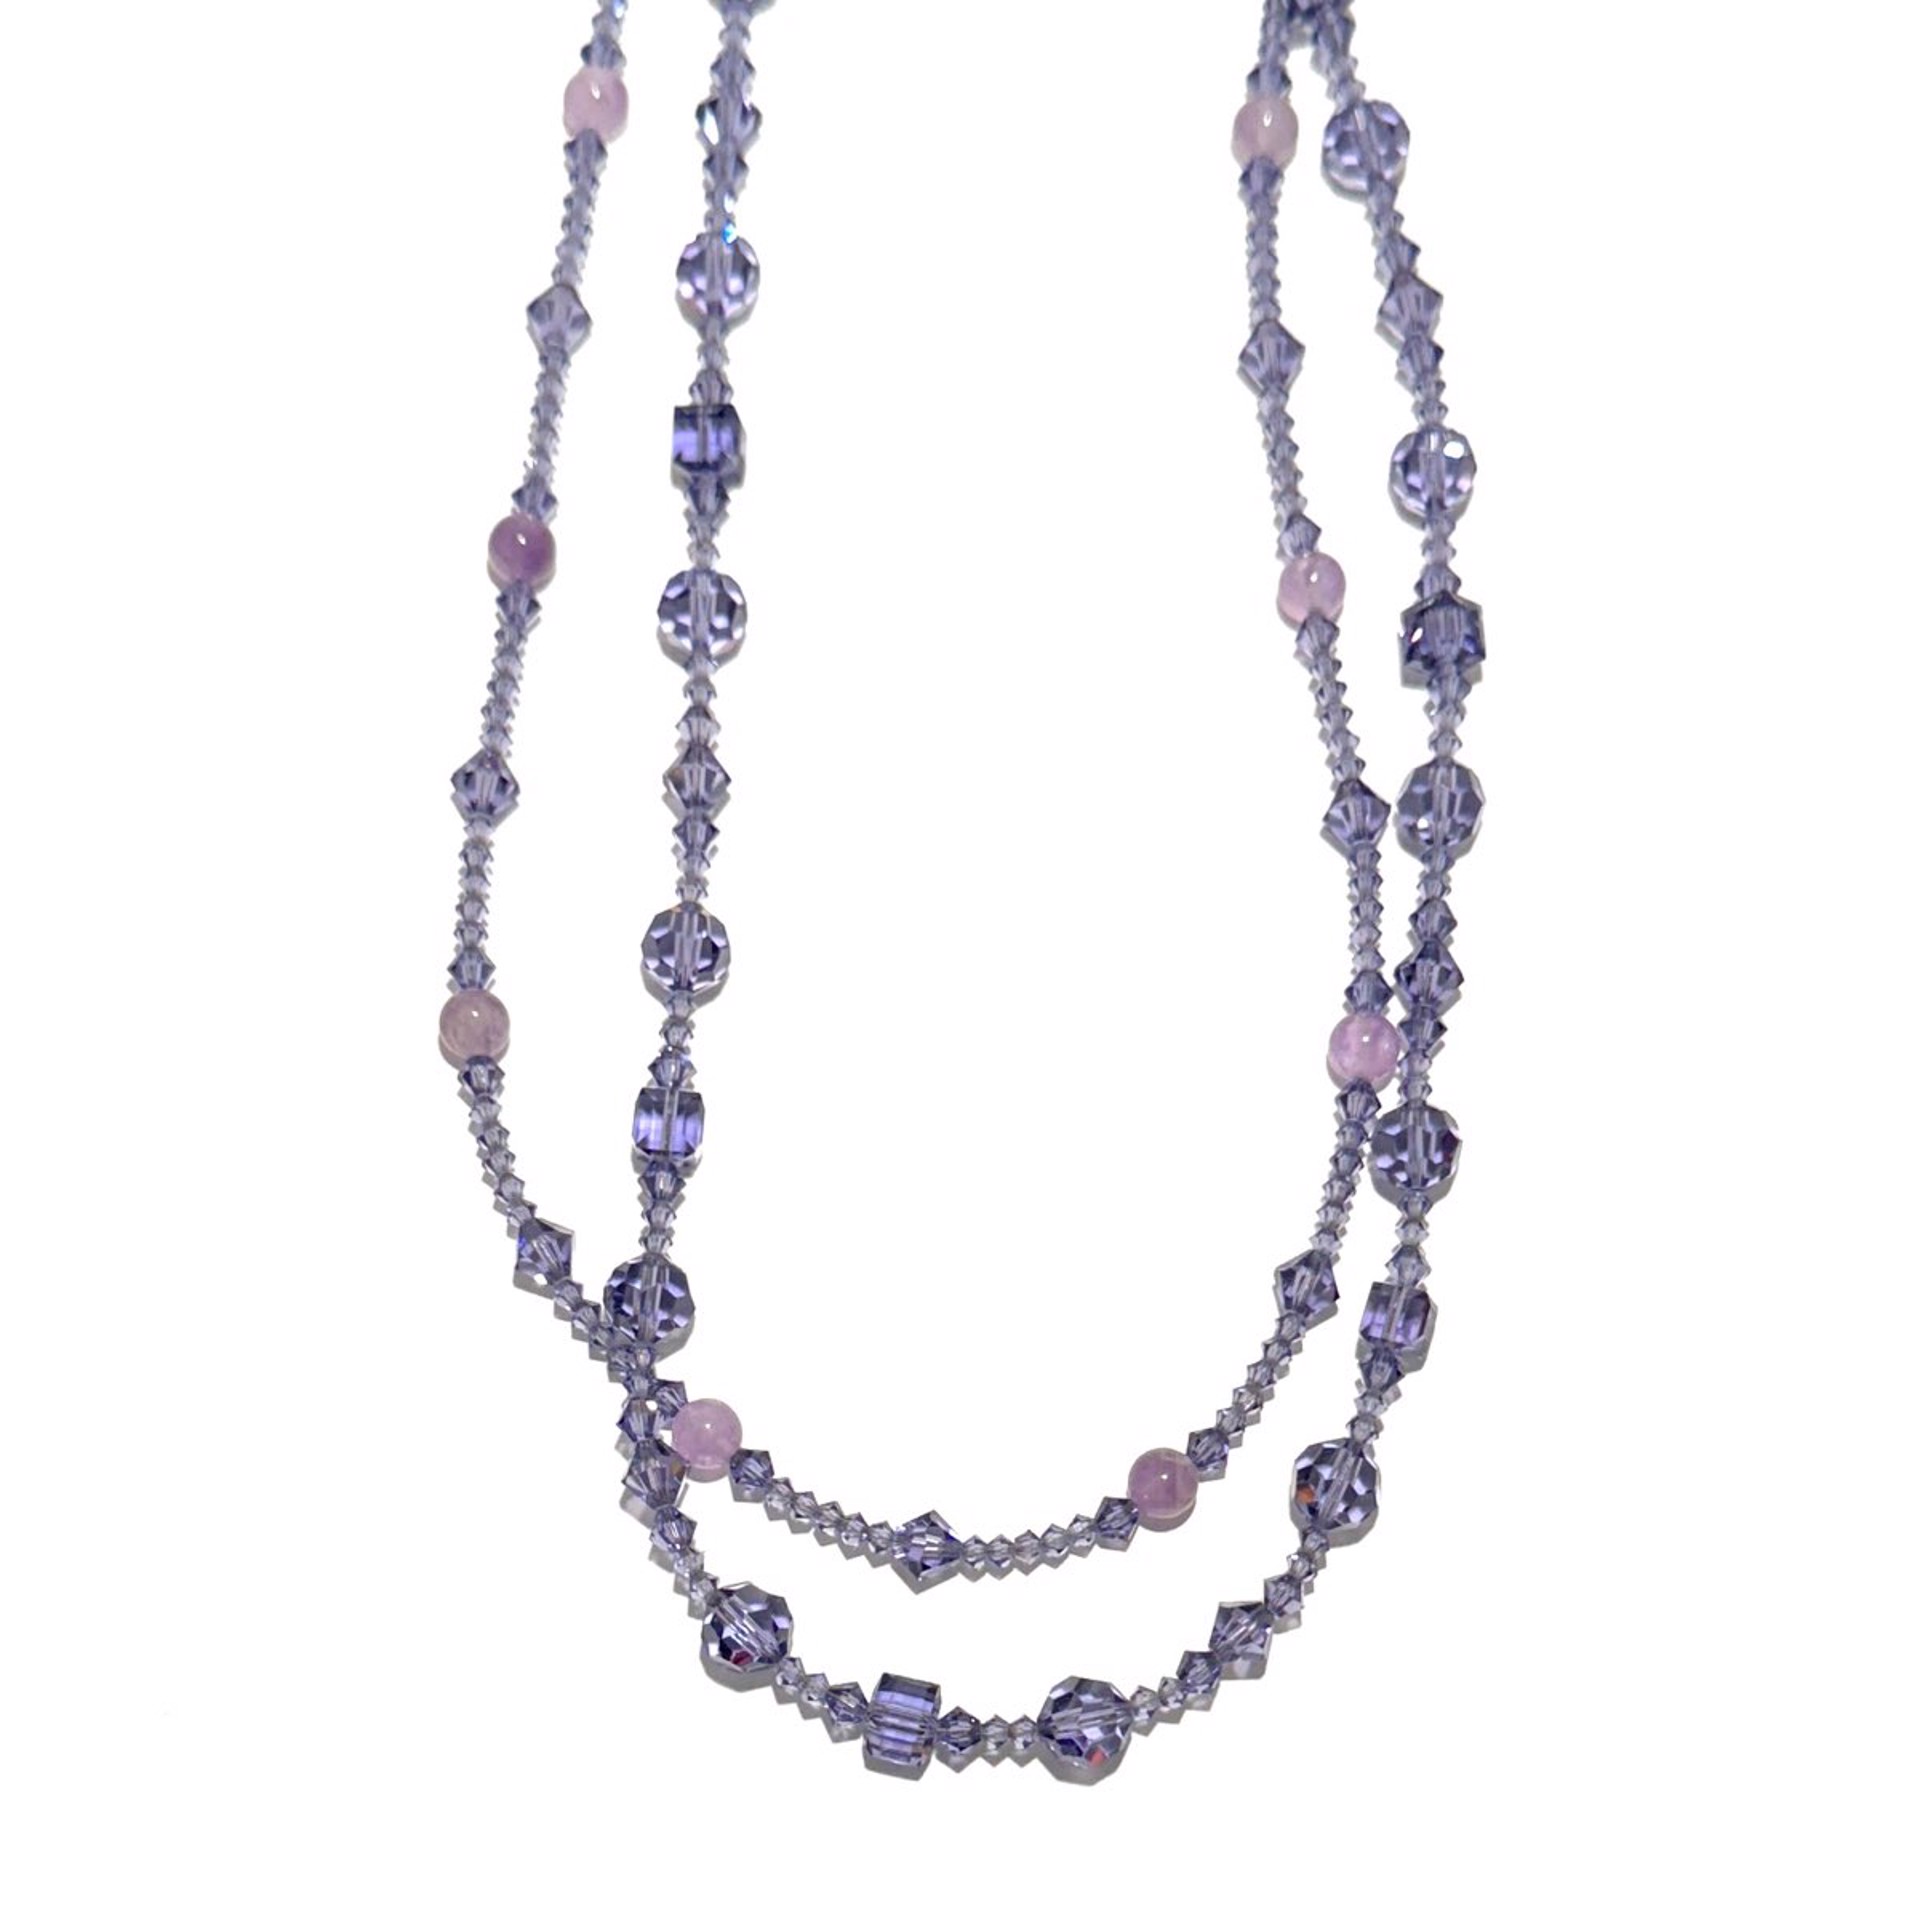 Double Strand Crystal Tanzanite and Pale Amethyst Necklace SHOSH23-39 by Shoshannah Weinisch